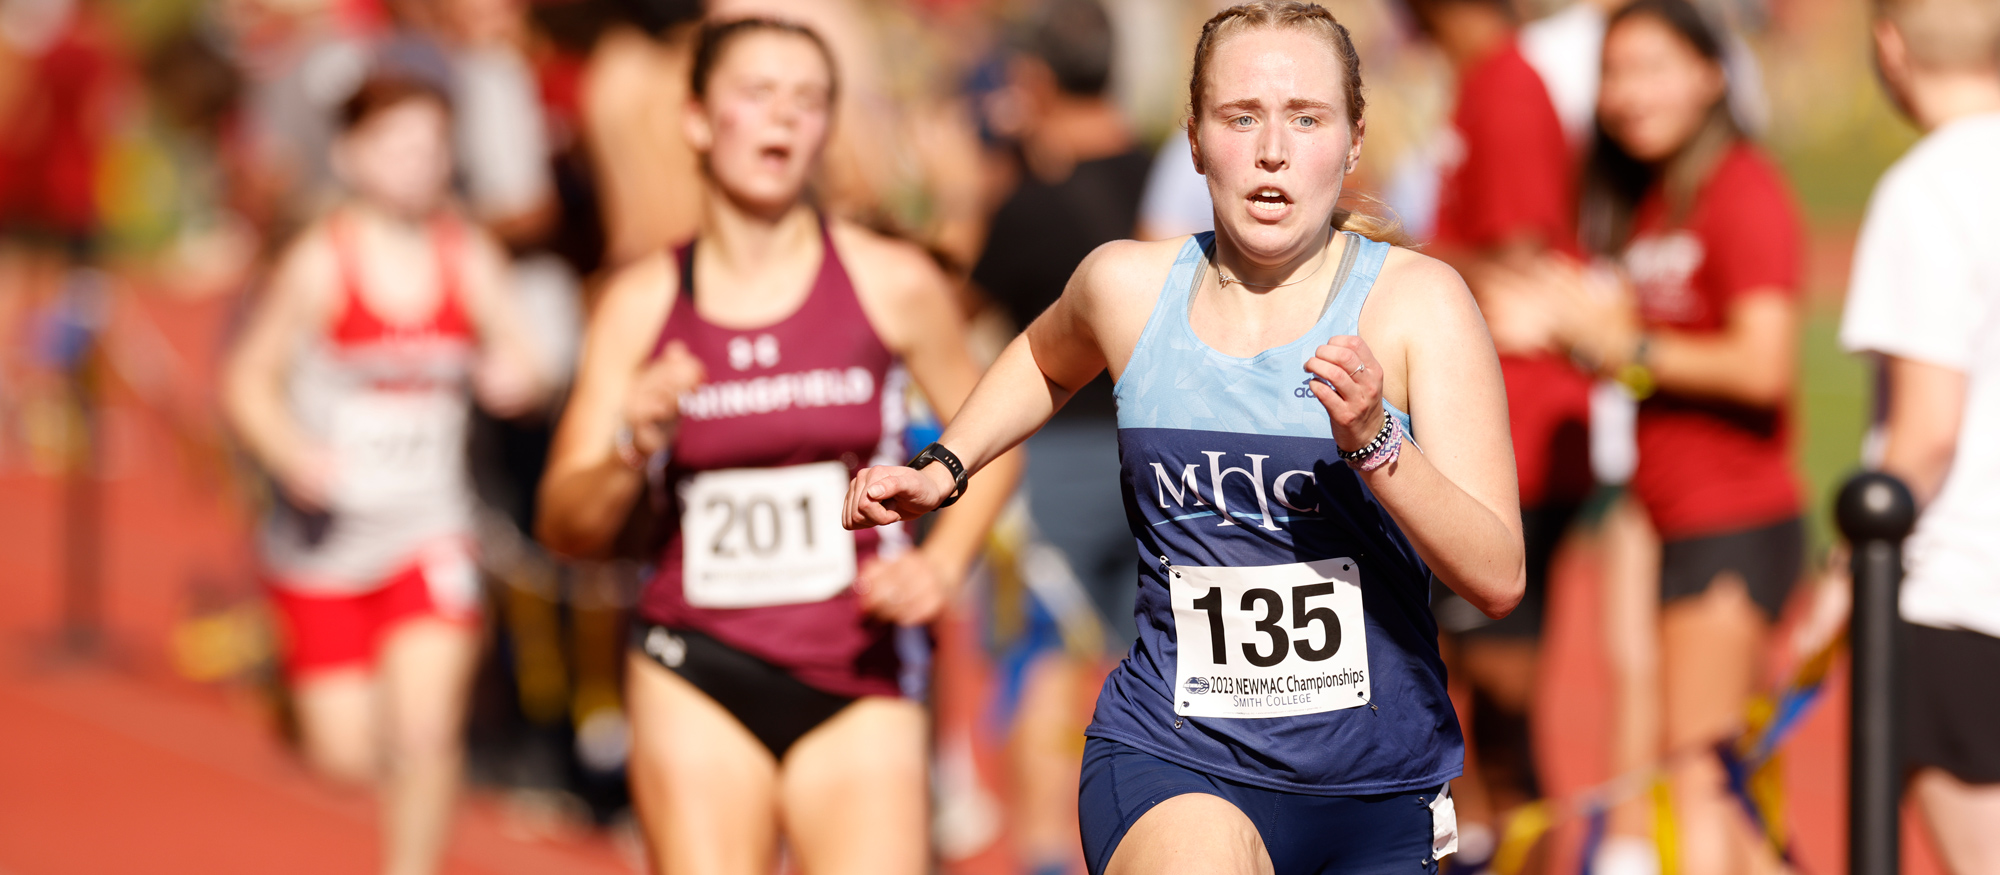 Bridget Hall races to the finish line en route to 38th place out of 118 runners at the NEWMAC Cross Country Championships at Smith College on Oct. 28, 2023. (Frank Poulin/Courtesy of Smith College)